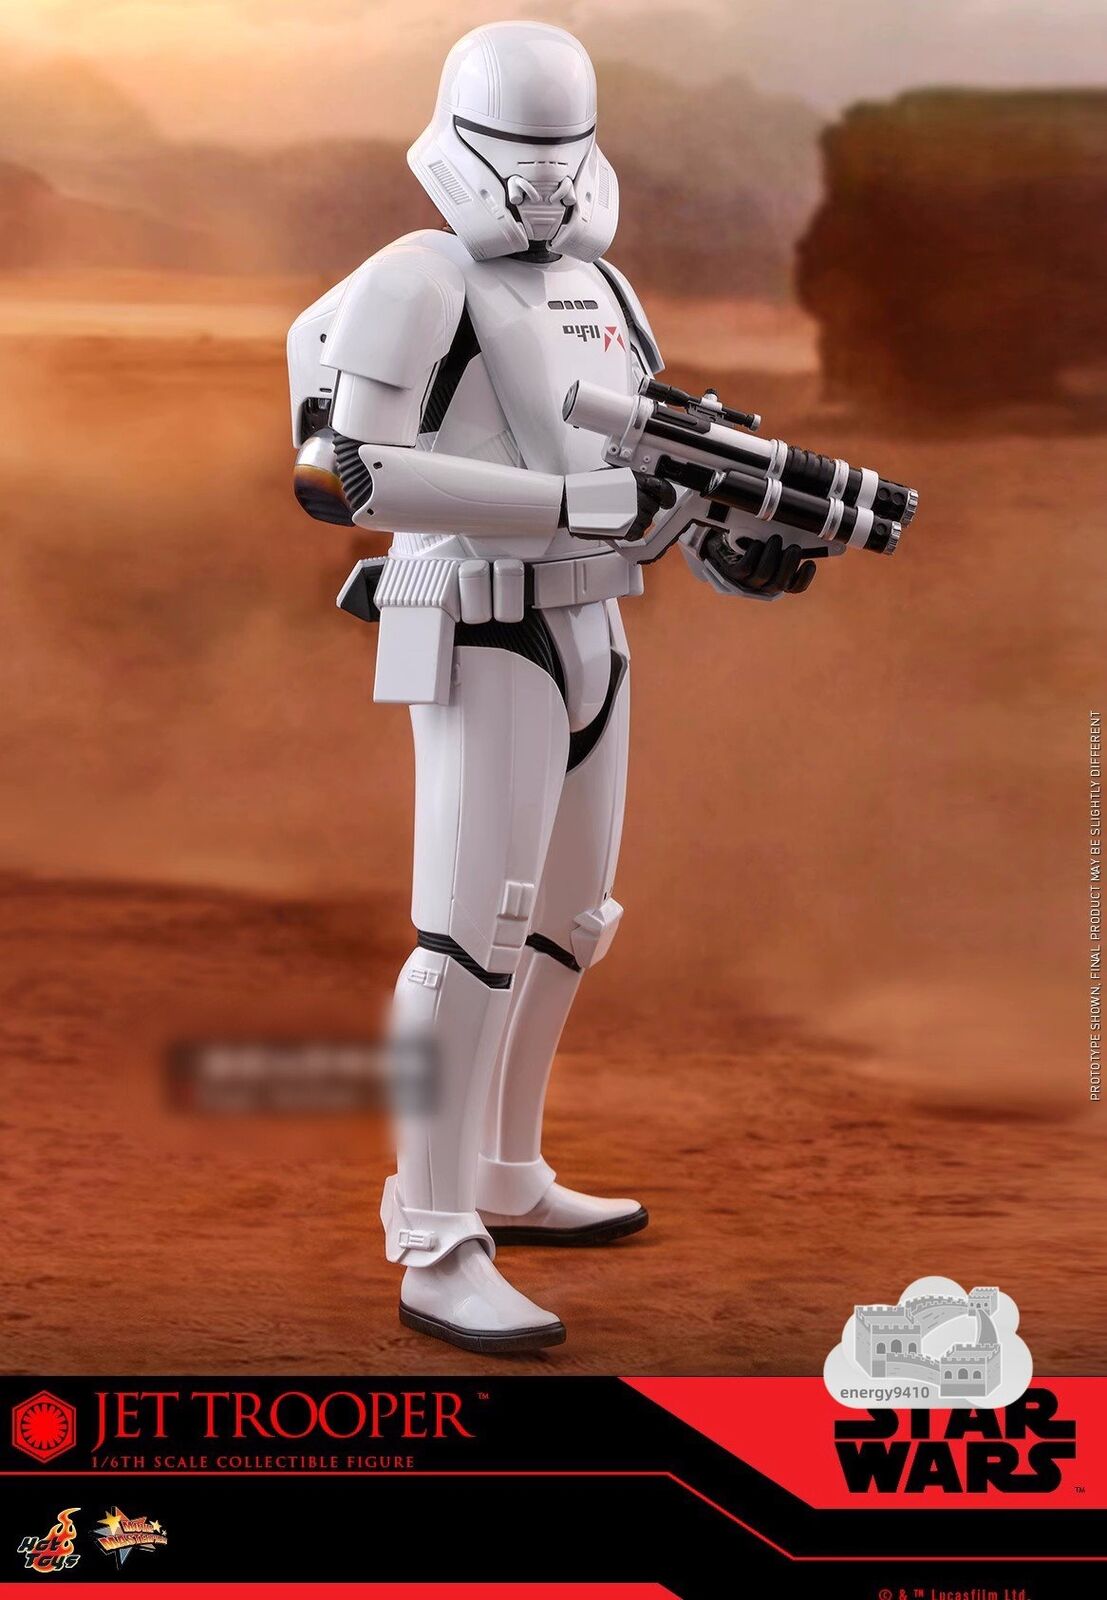 Star Wars IX 1/6th Scale Collectible Figure White Jet Troopers Reproduction